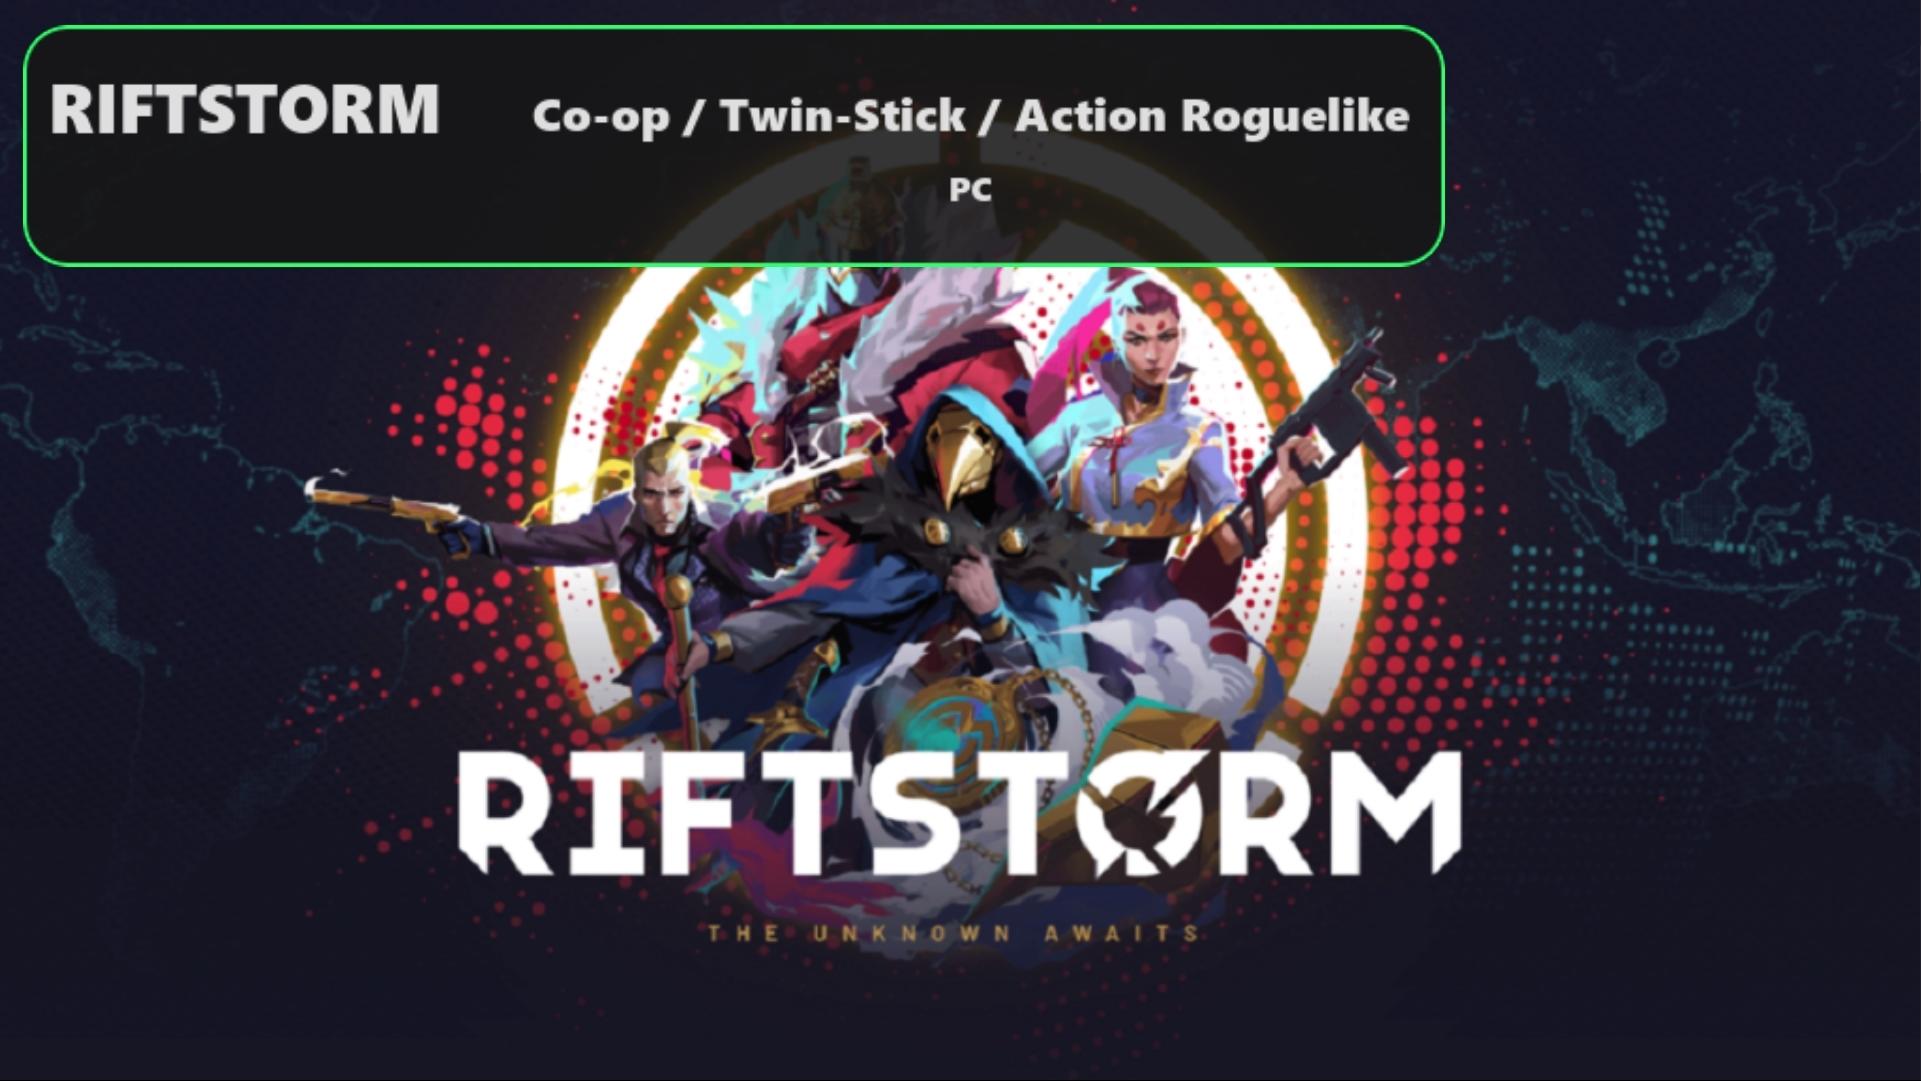 Experience the Fast-Paced gameplay of Riftstorm!